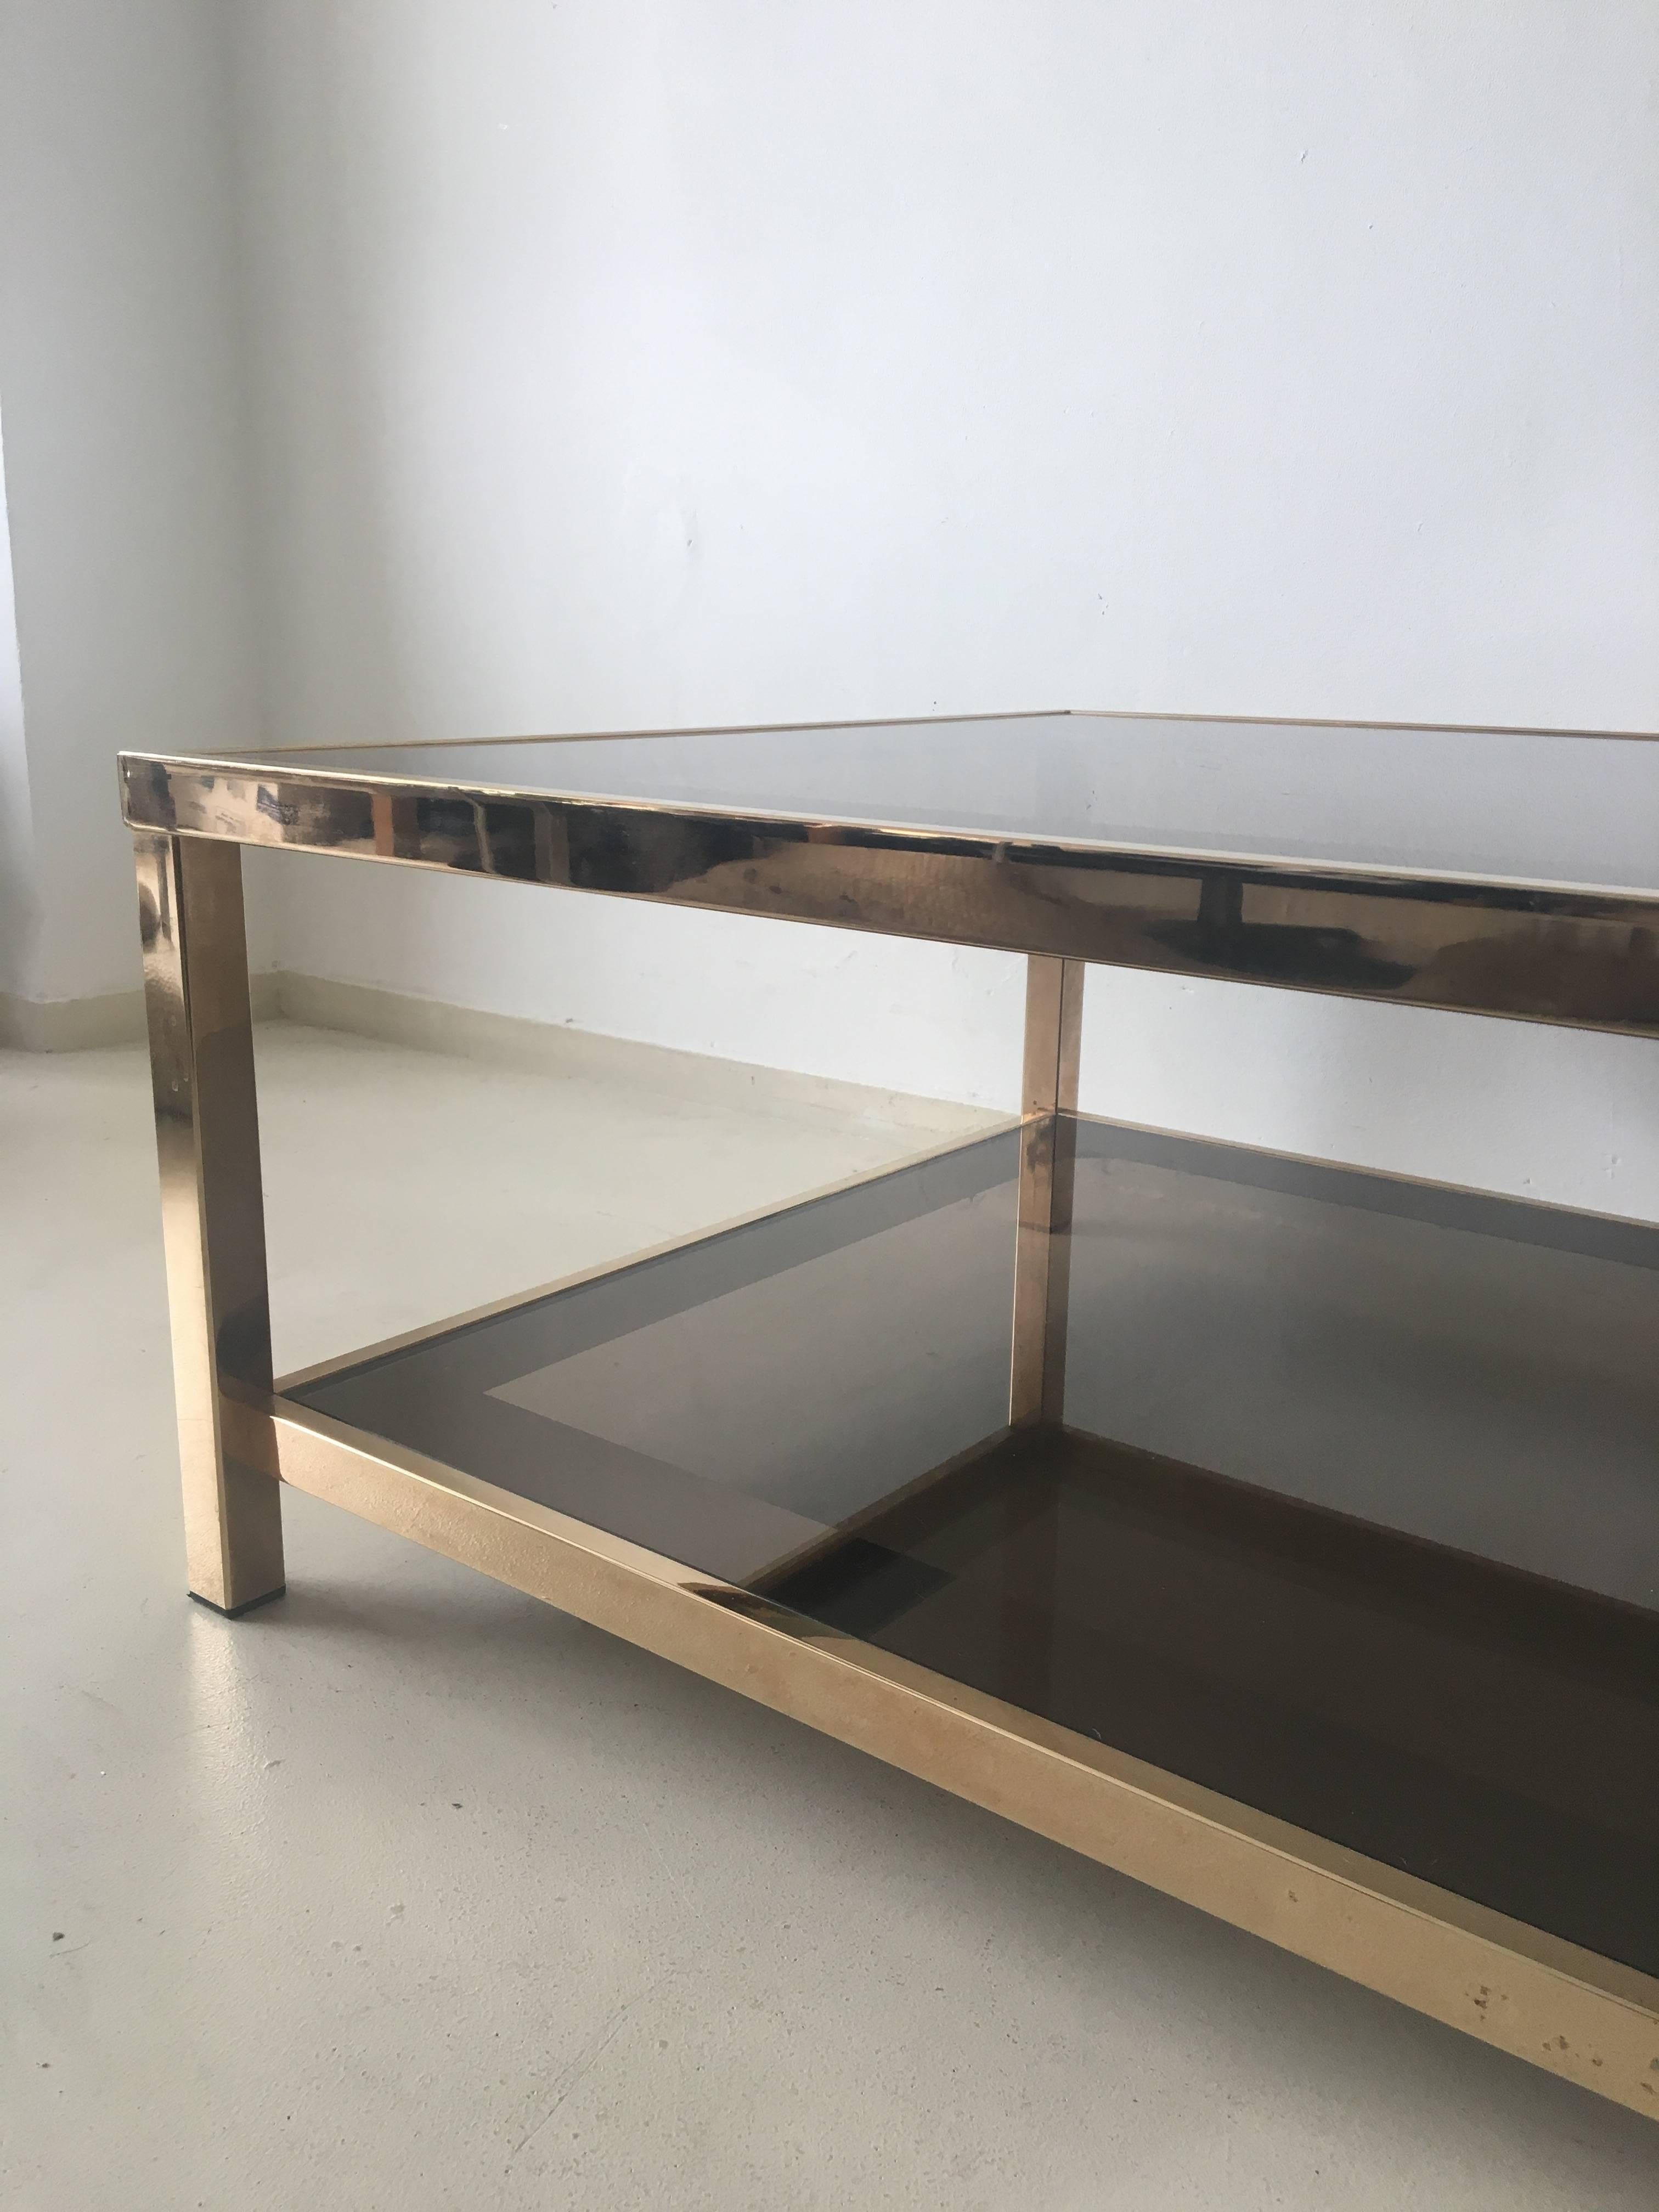 23-Carat Rectangular Gold-Plated Coffee Table, 1960s In Good Condition For Sale In Schagen, NL